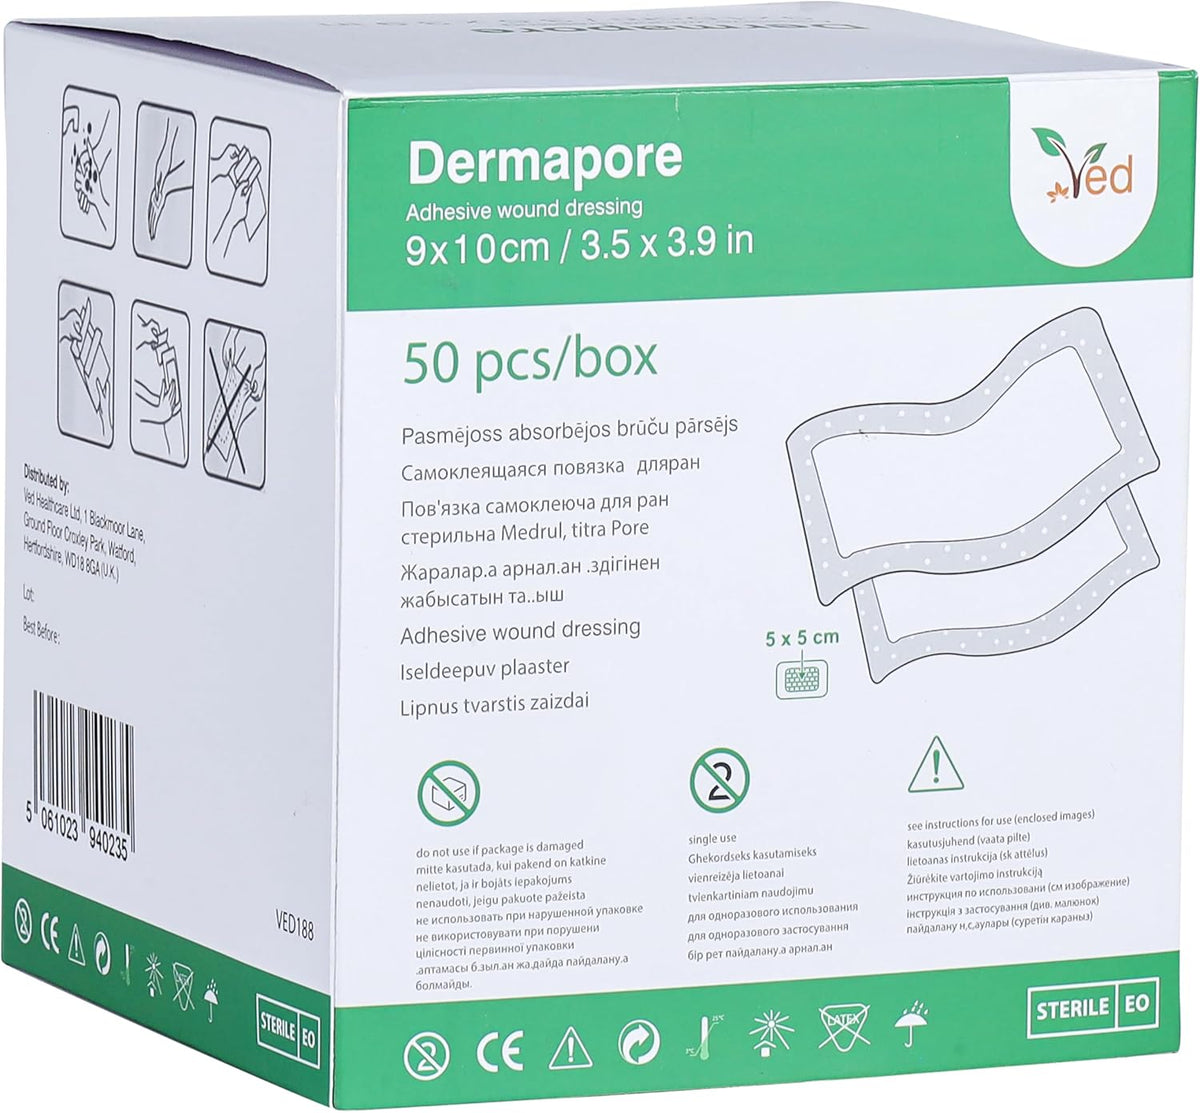 VED Dermapore Adhesive Wound Dressing- Suitable for cuts and grazes, Diabetic Leg ulcers, venous Leg ulcers, Small Pressure sores- Medium, 9 x 10cm (Pack of 50).